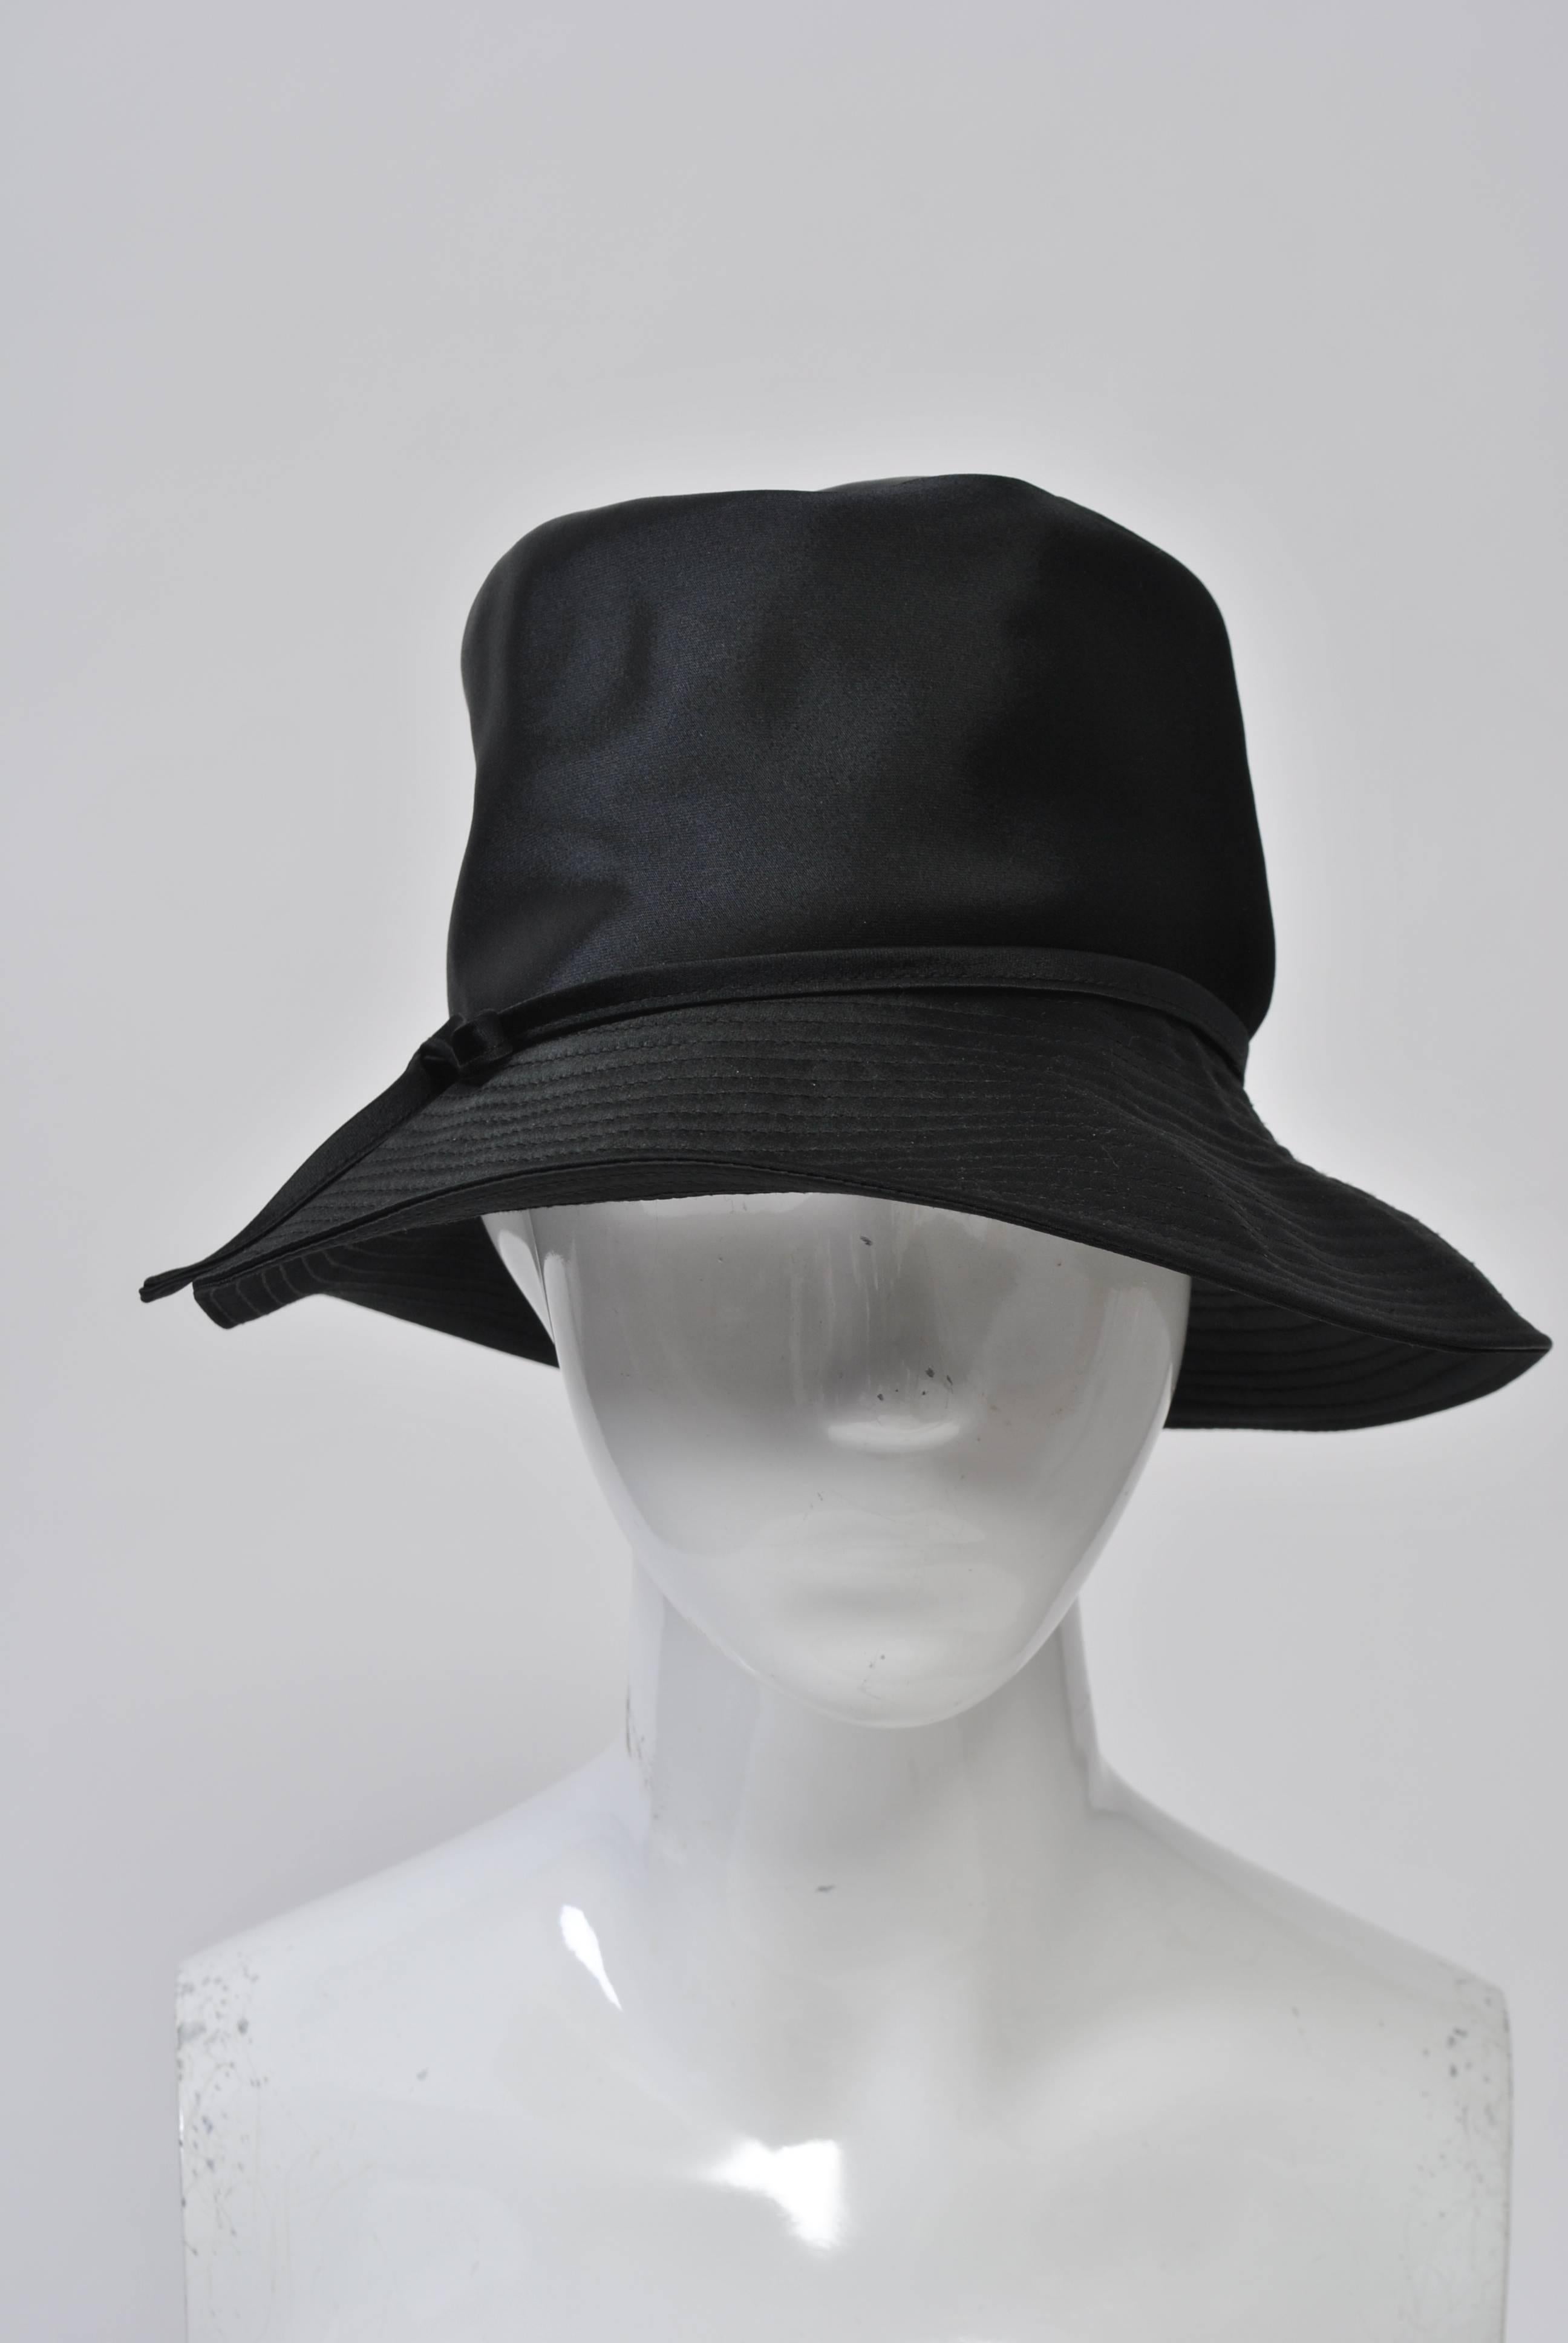 Black satin hat with narrow band and side bow, stitched brim. Made by Betmar, retailed by Bonwit Teller. Looks unworn. Medium size.